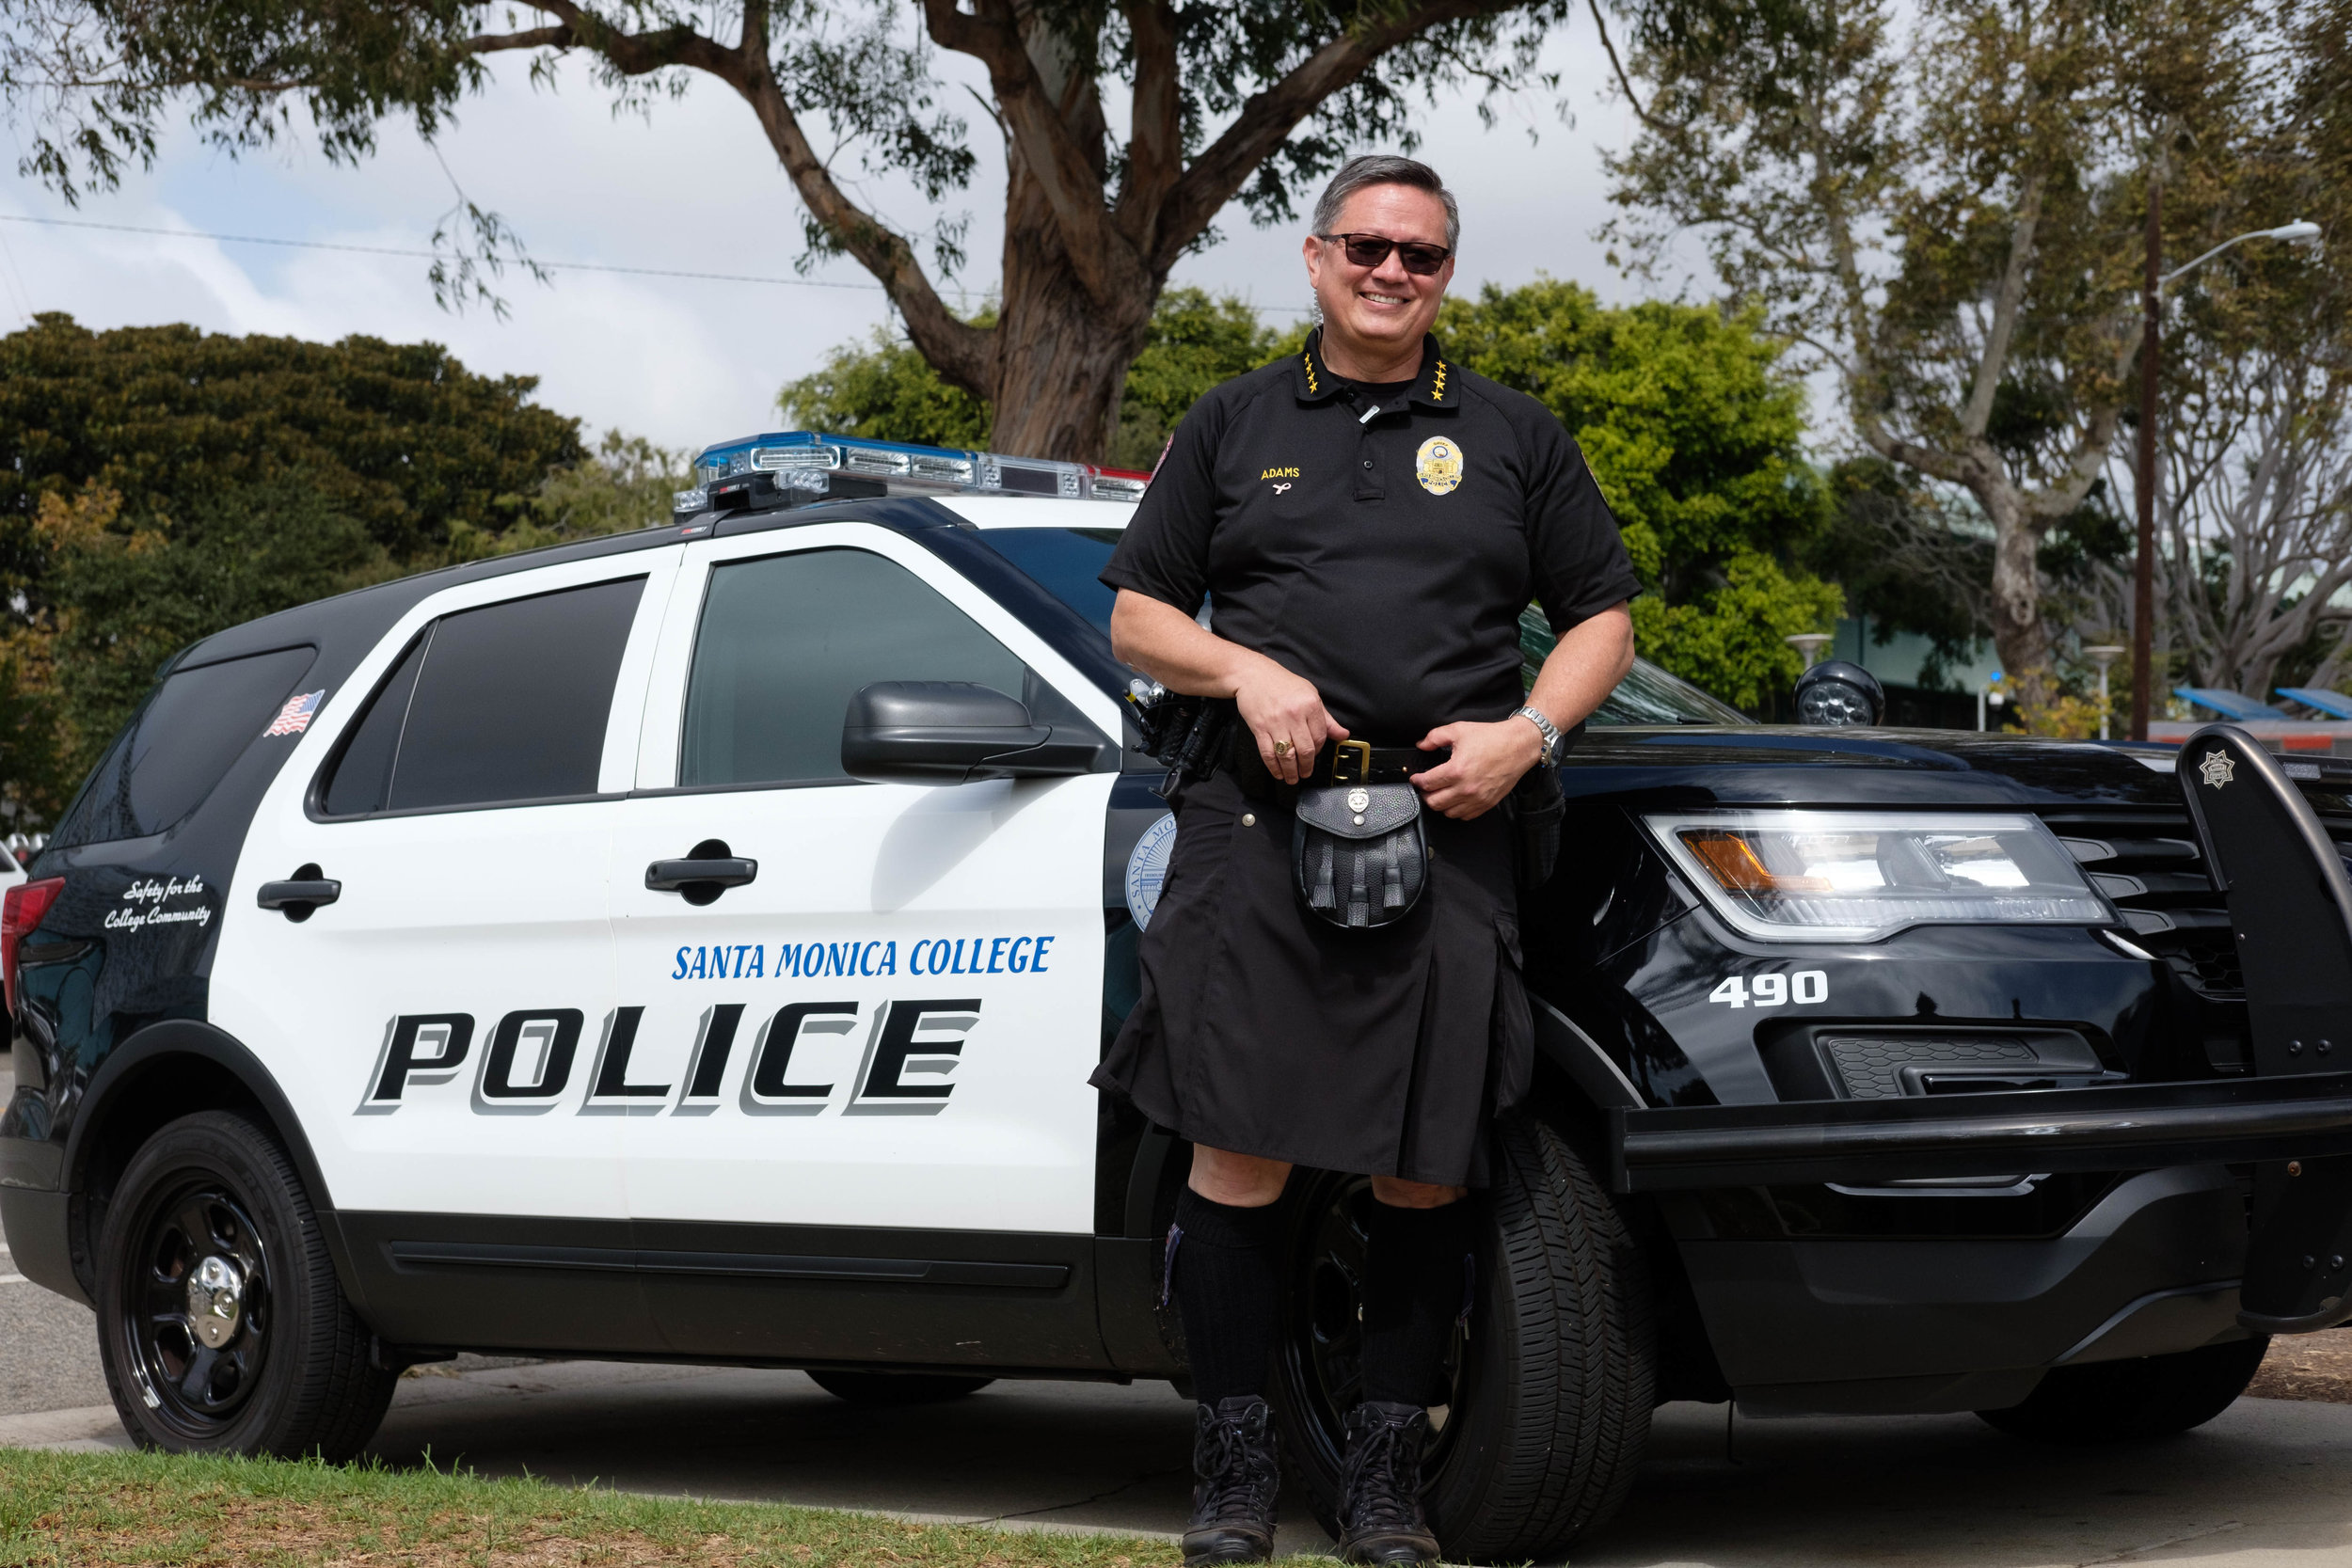  Chief of Police, Johnnie Adams poses for a portrait while wearing a 5.11 tactical kilt. Adams promised to wear the kilt if $750 was raised for Breast Cancer Awareness. Photo by: Jayrol San Jose 